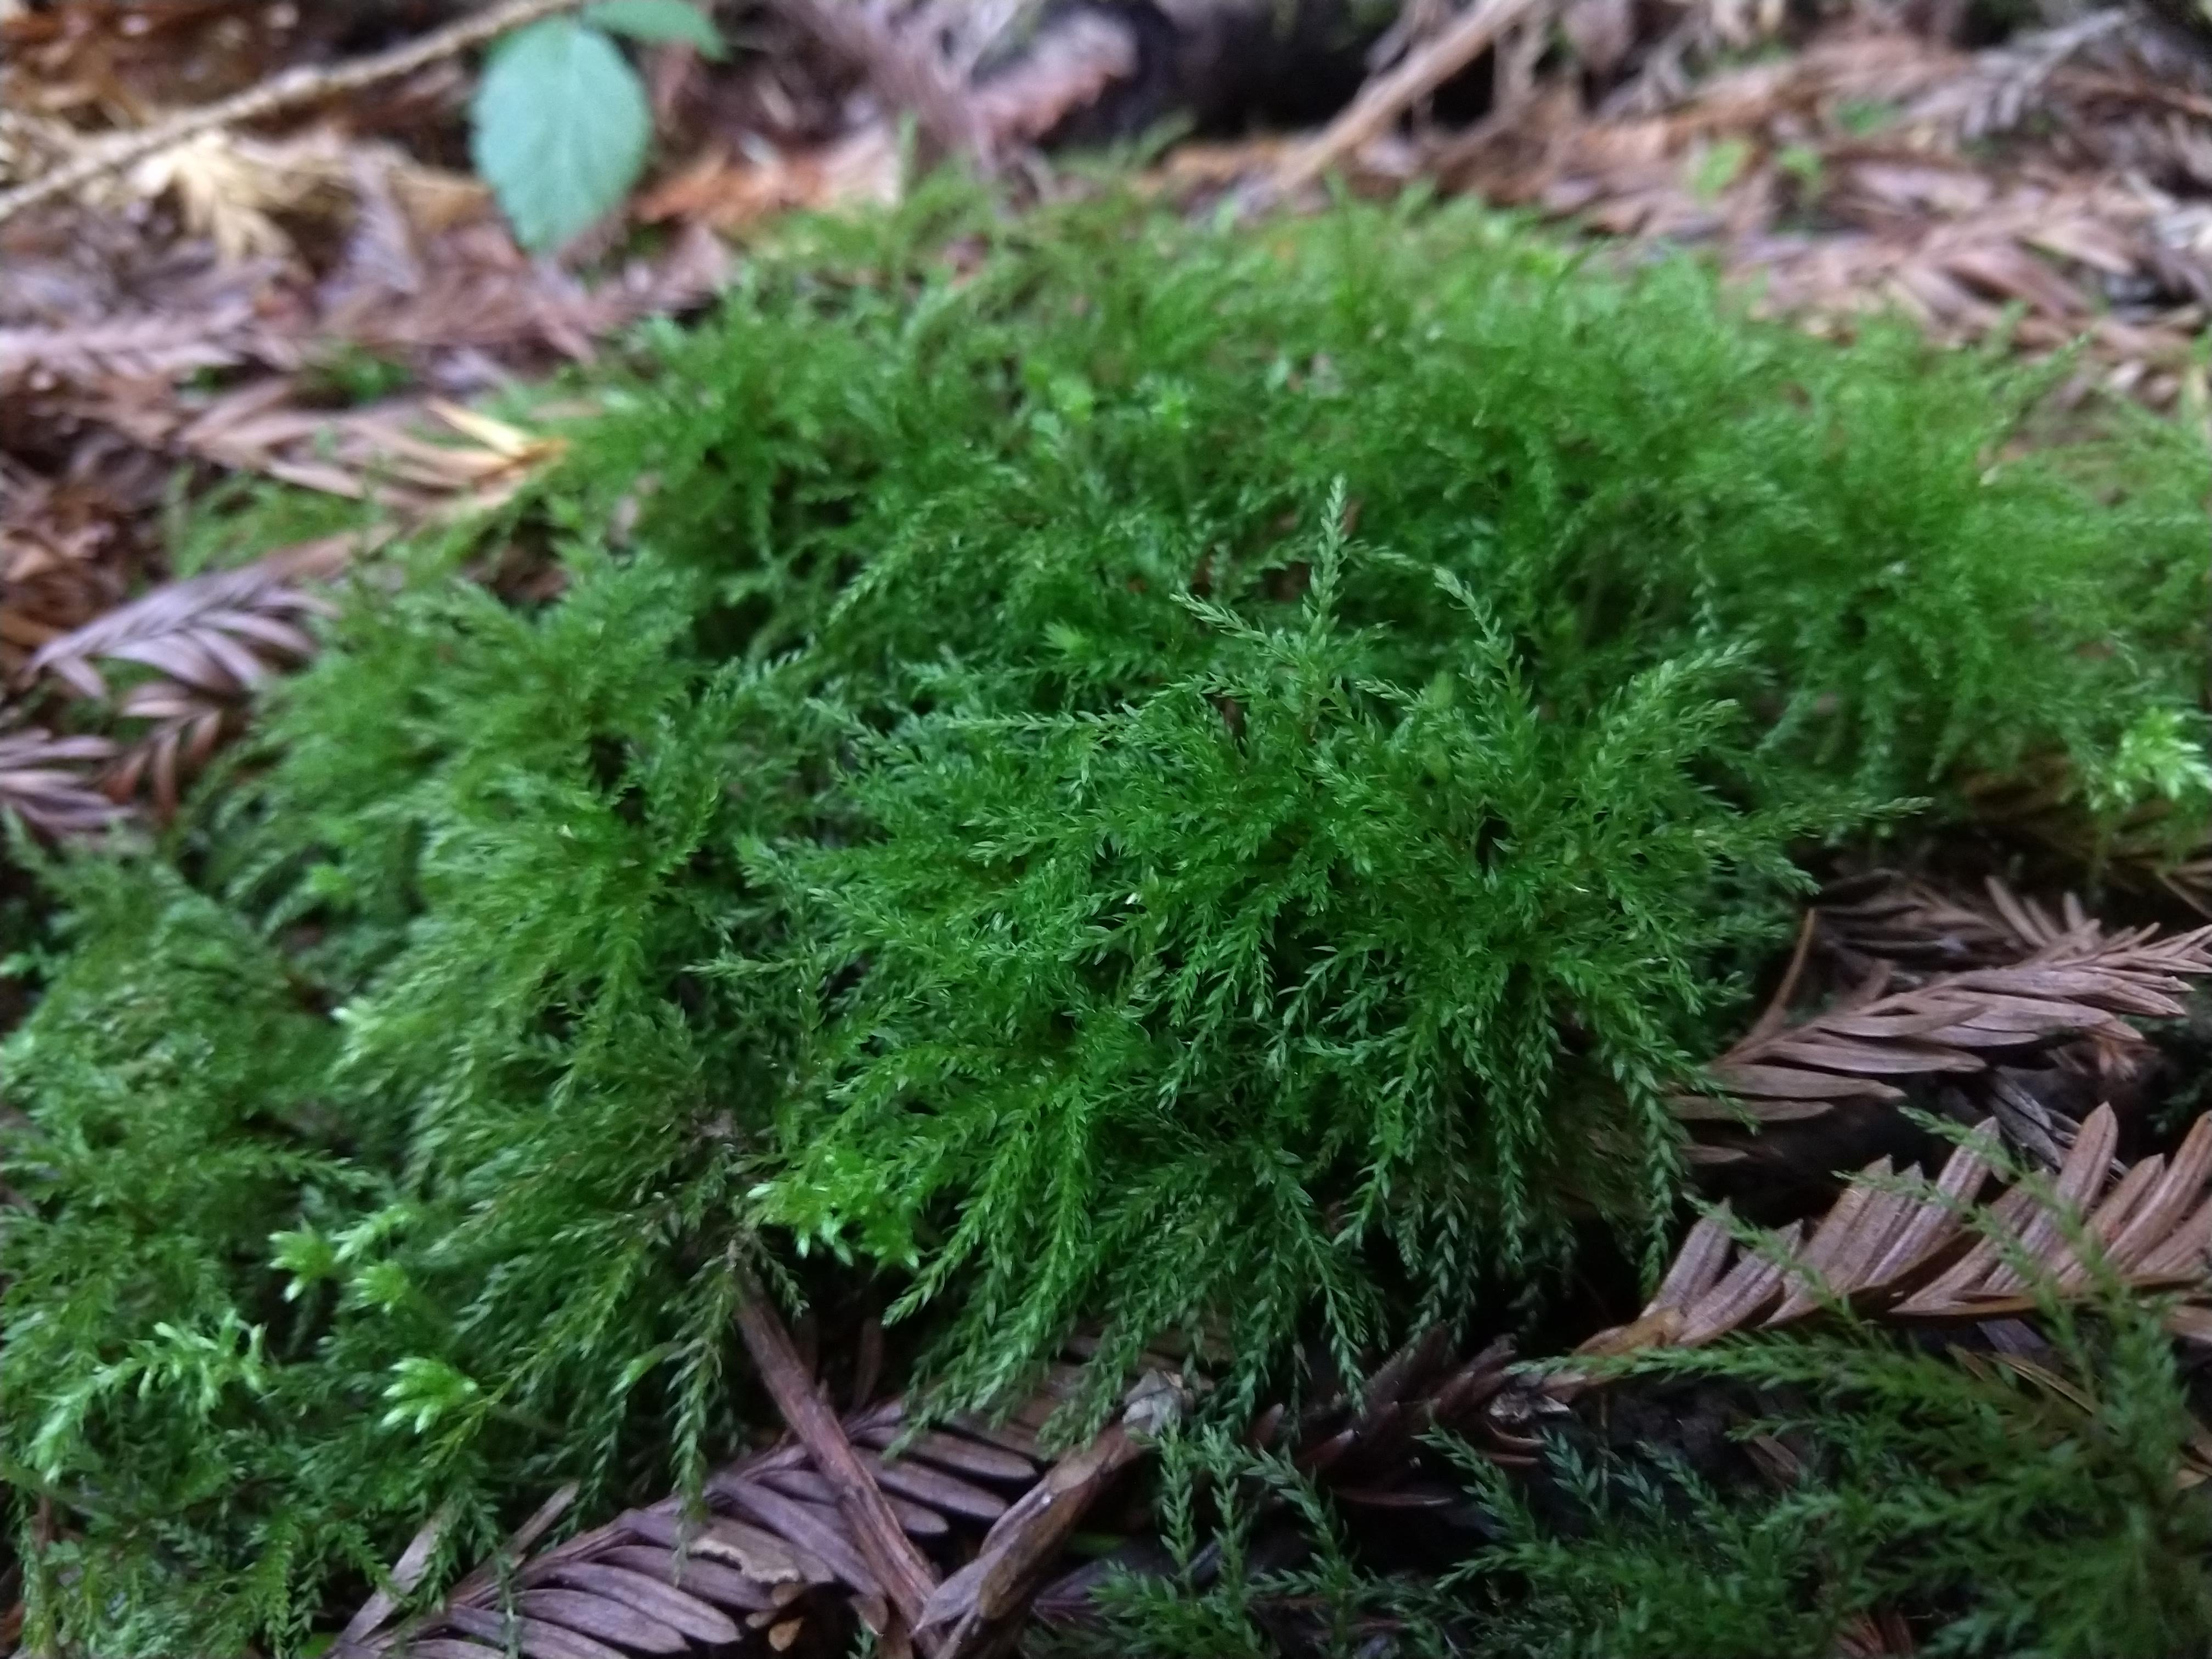 A clump of mosses. Many tiny stems covered in leaves. 